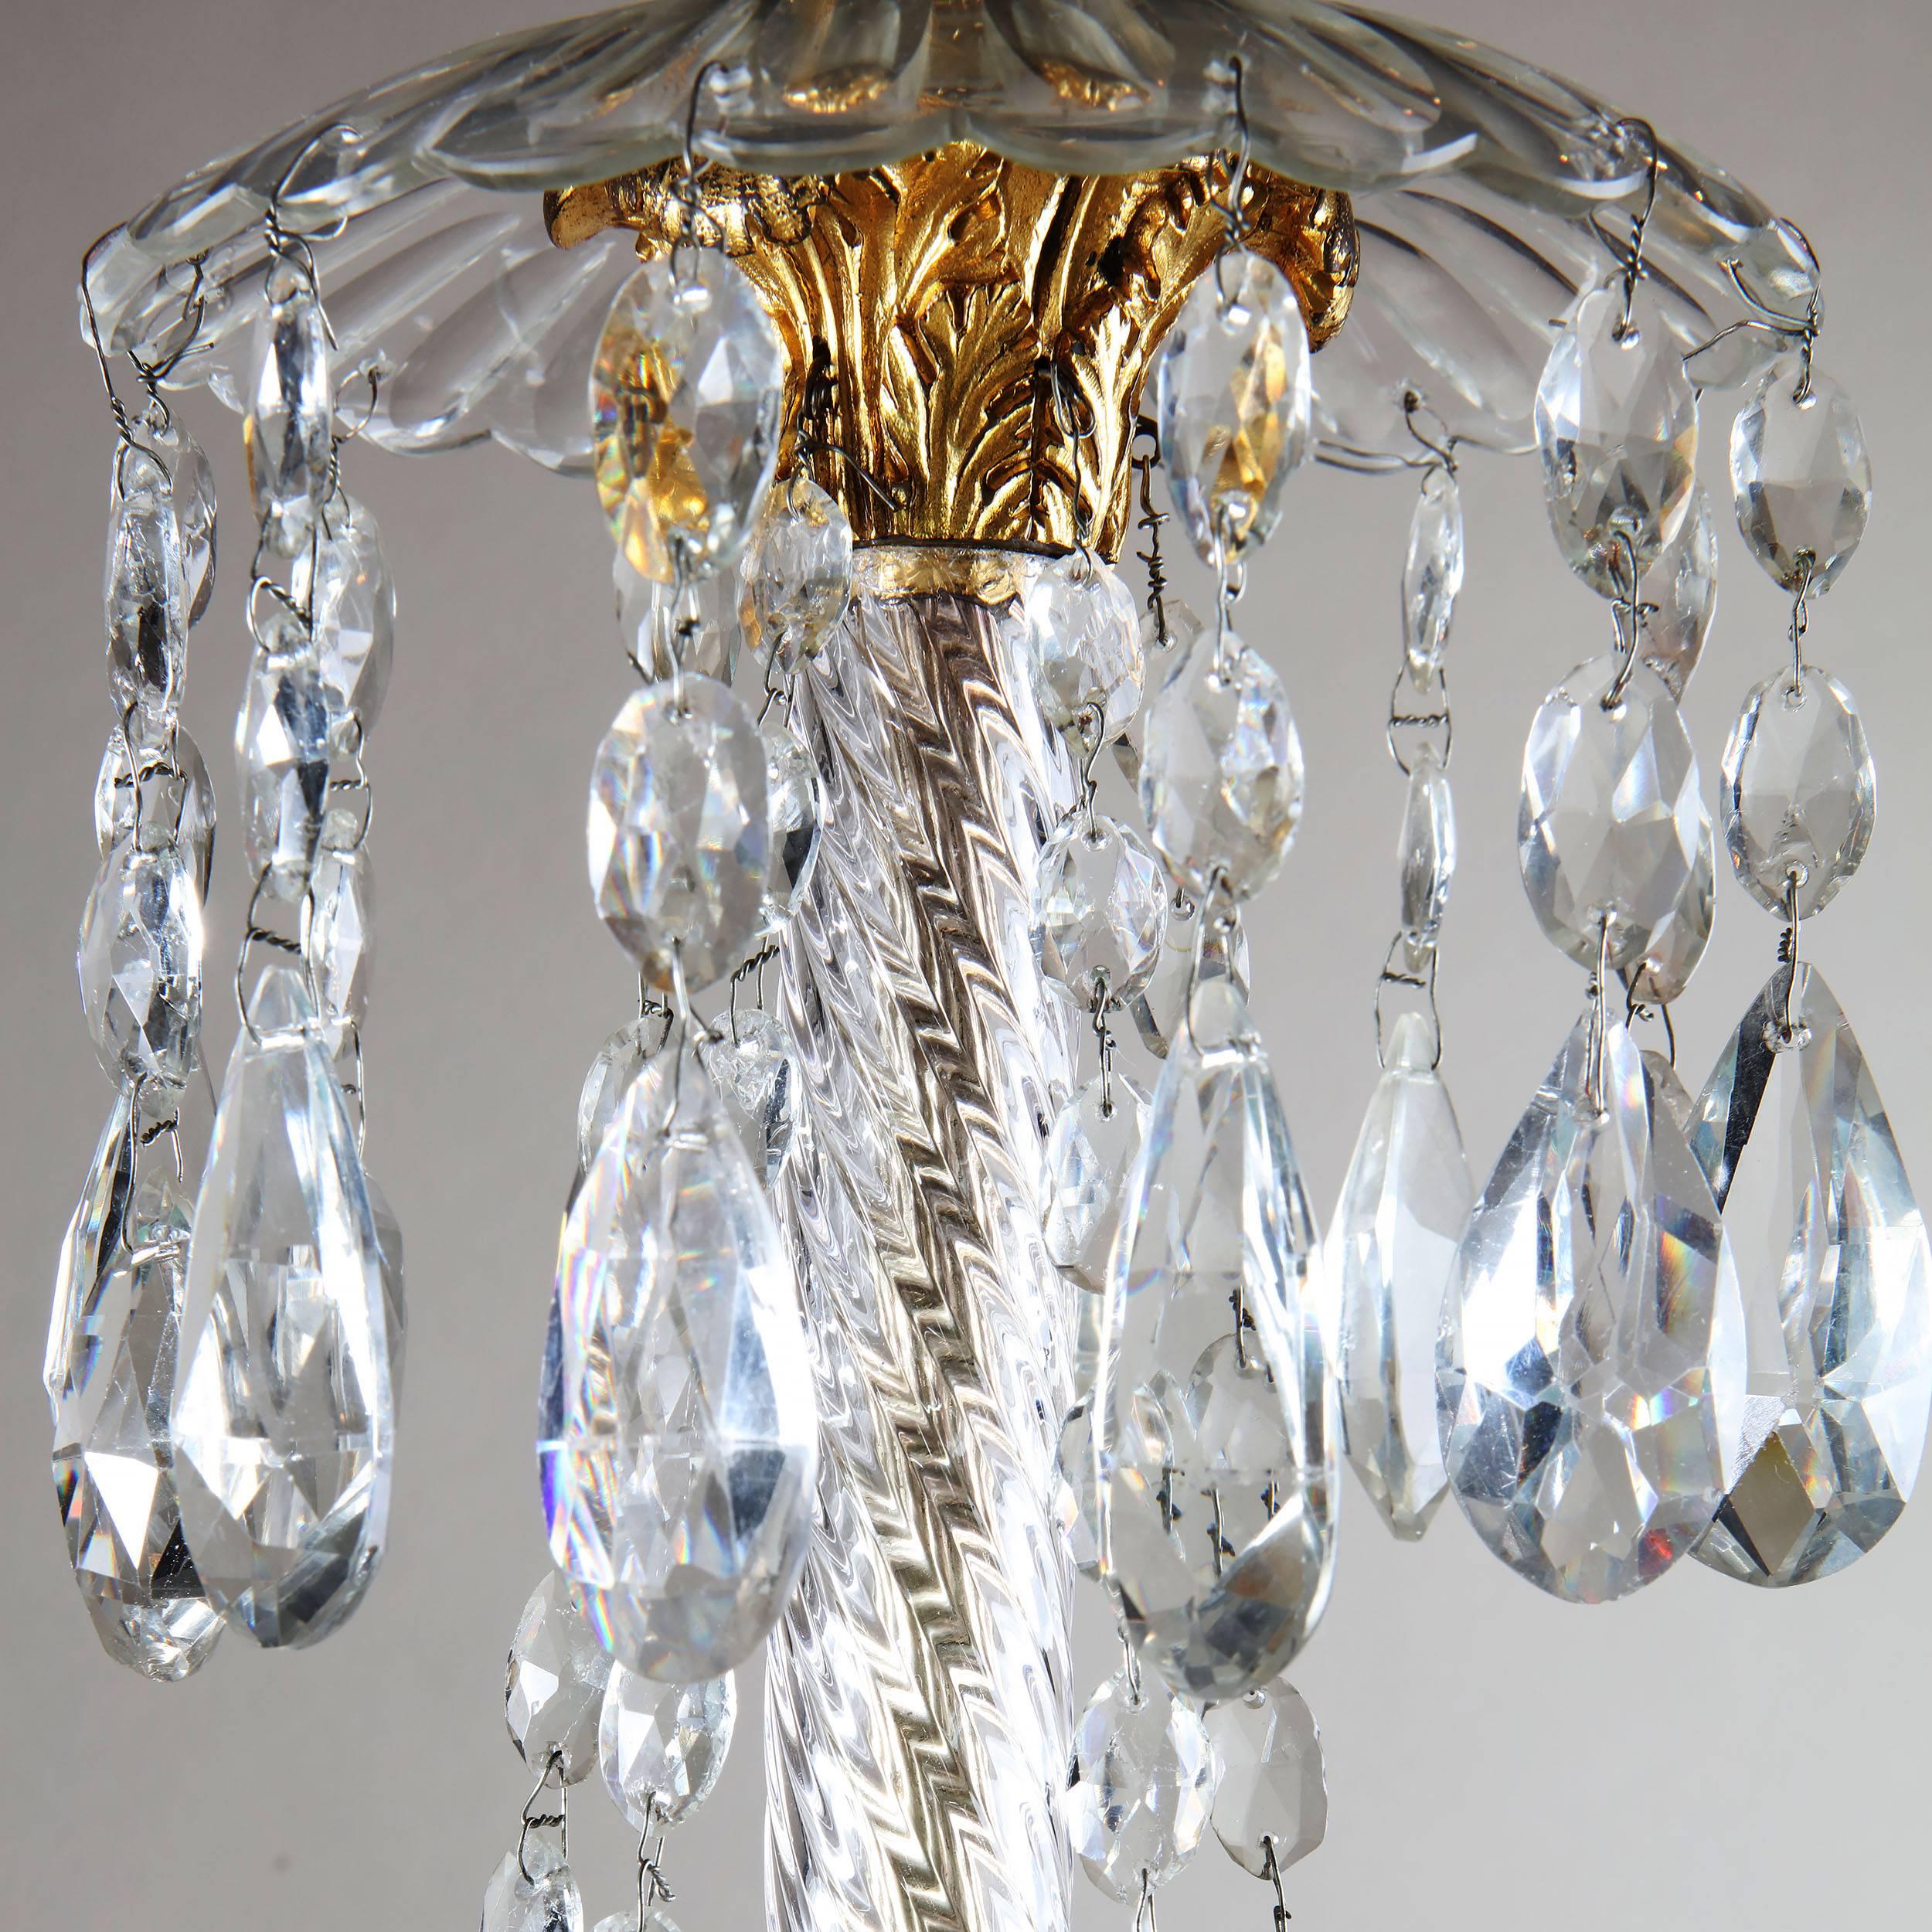 Antique English Early 19th Century Wedgwood Chandelier In Excellent Condition For Sale In London, by appointment only